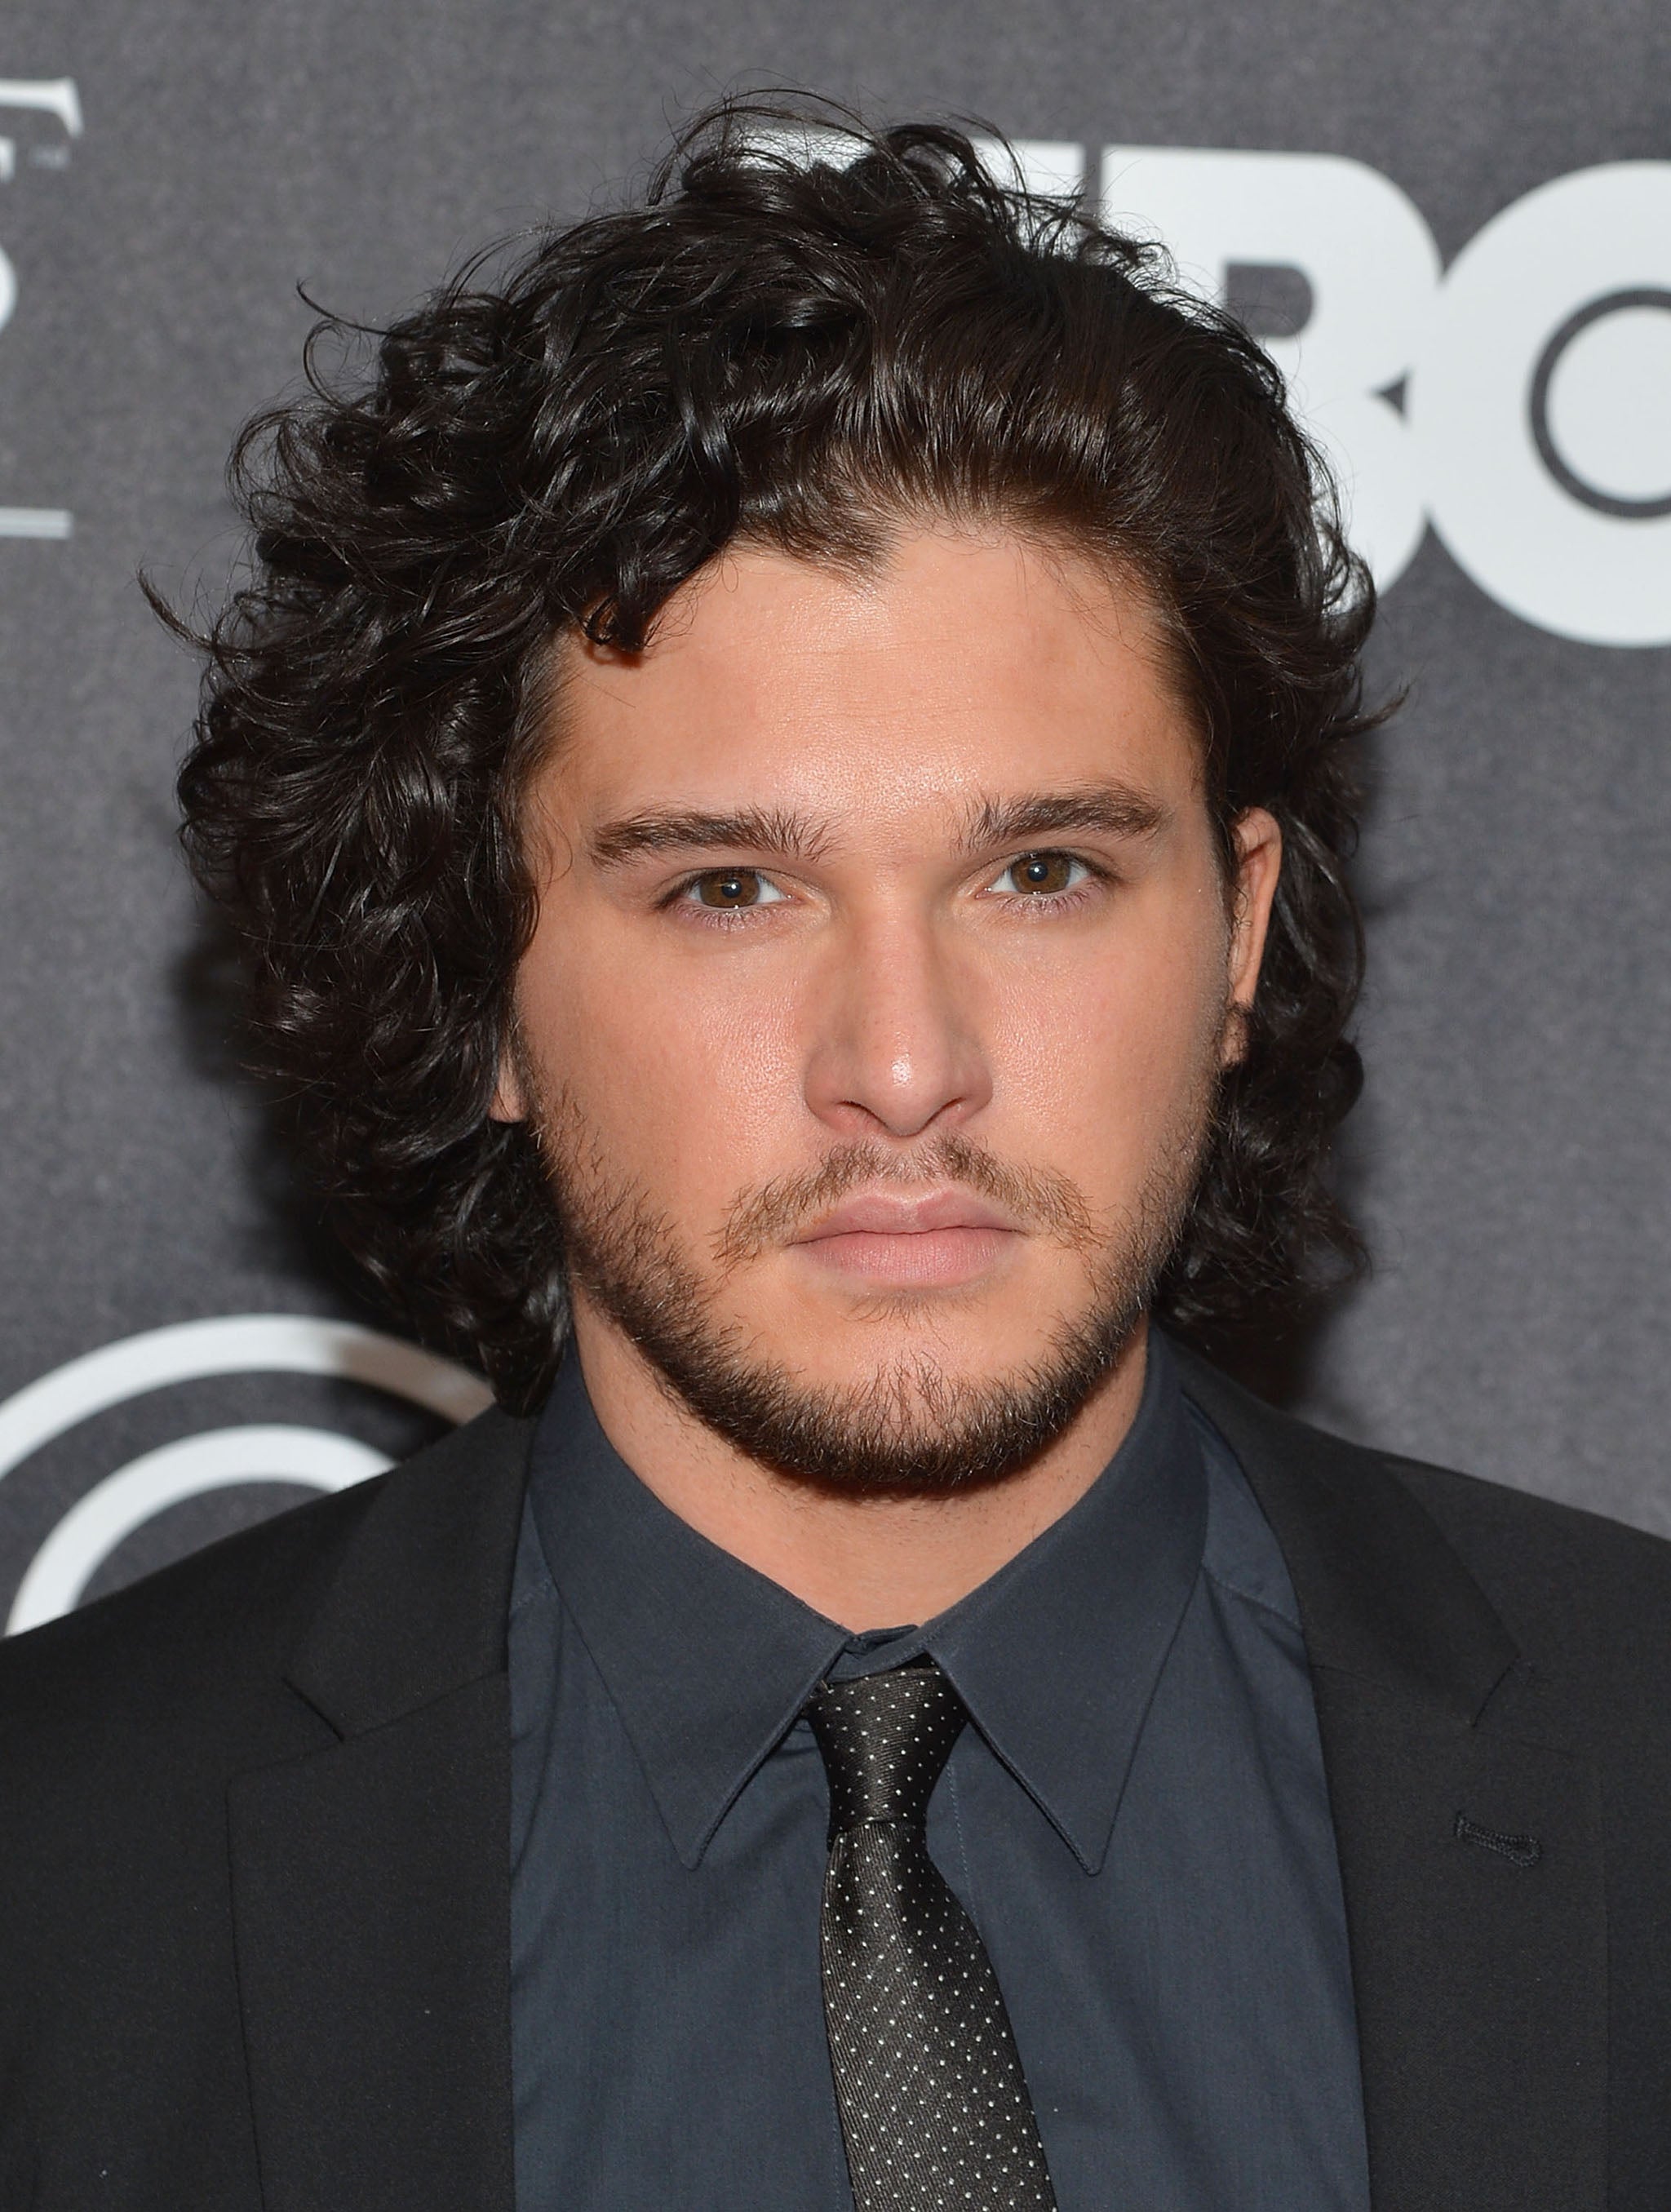 Game of Thrones Kit Harrington has revealed he is relaxed about going nude for the series